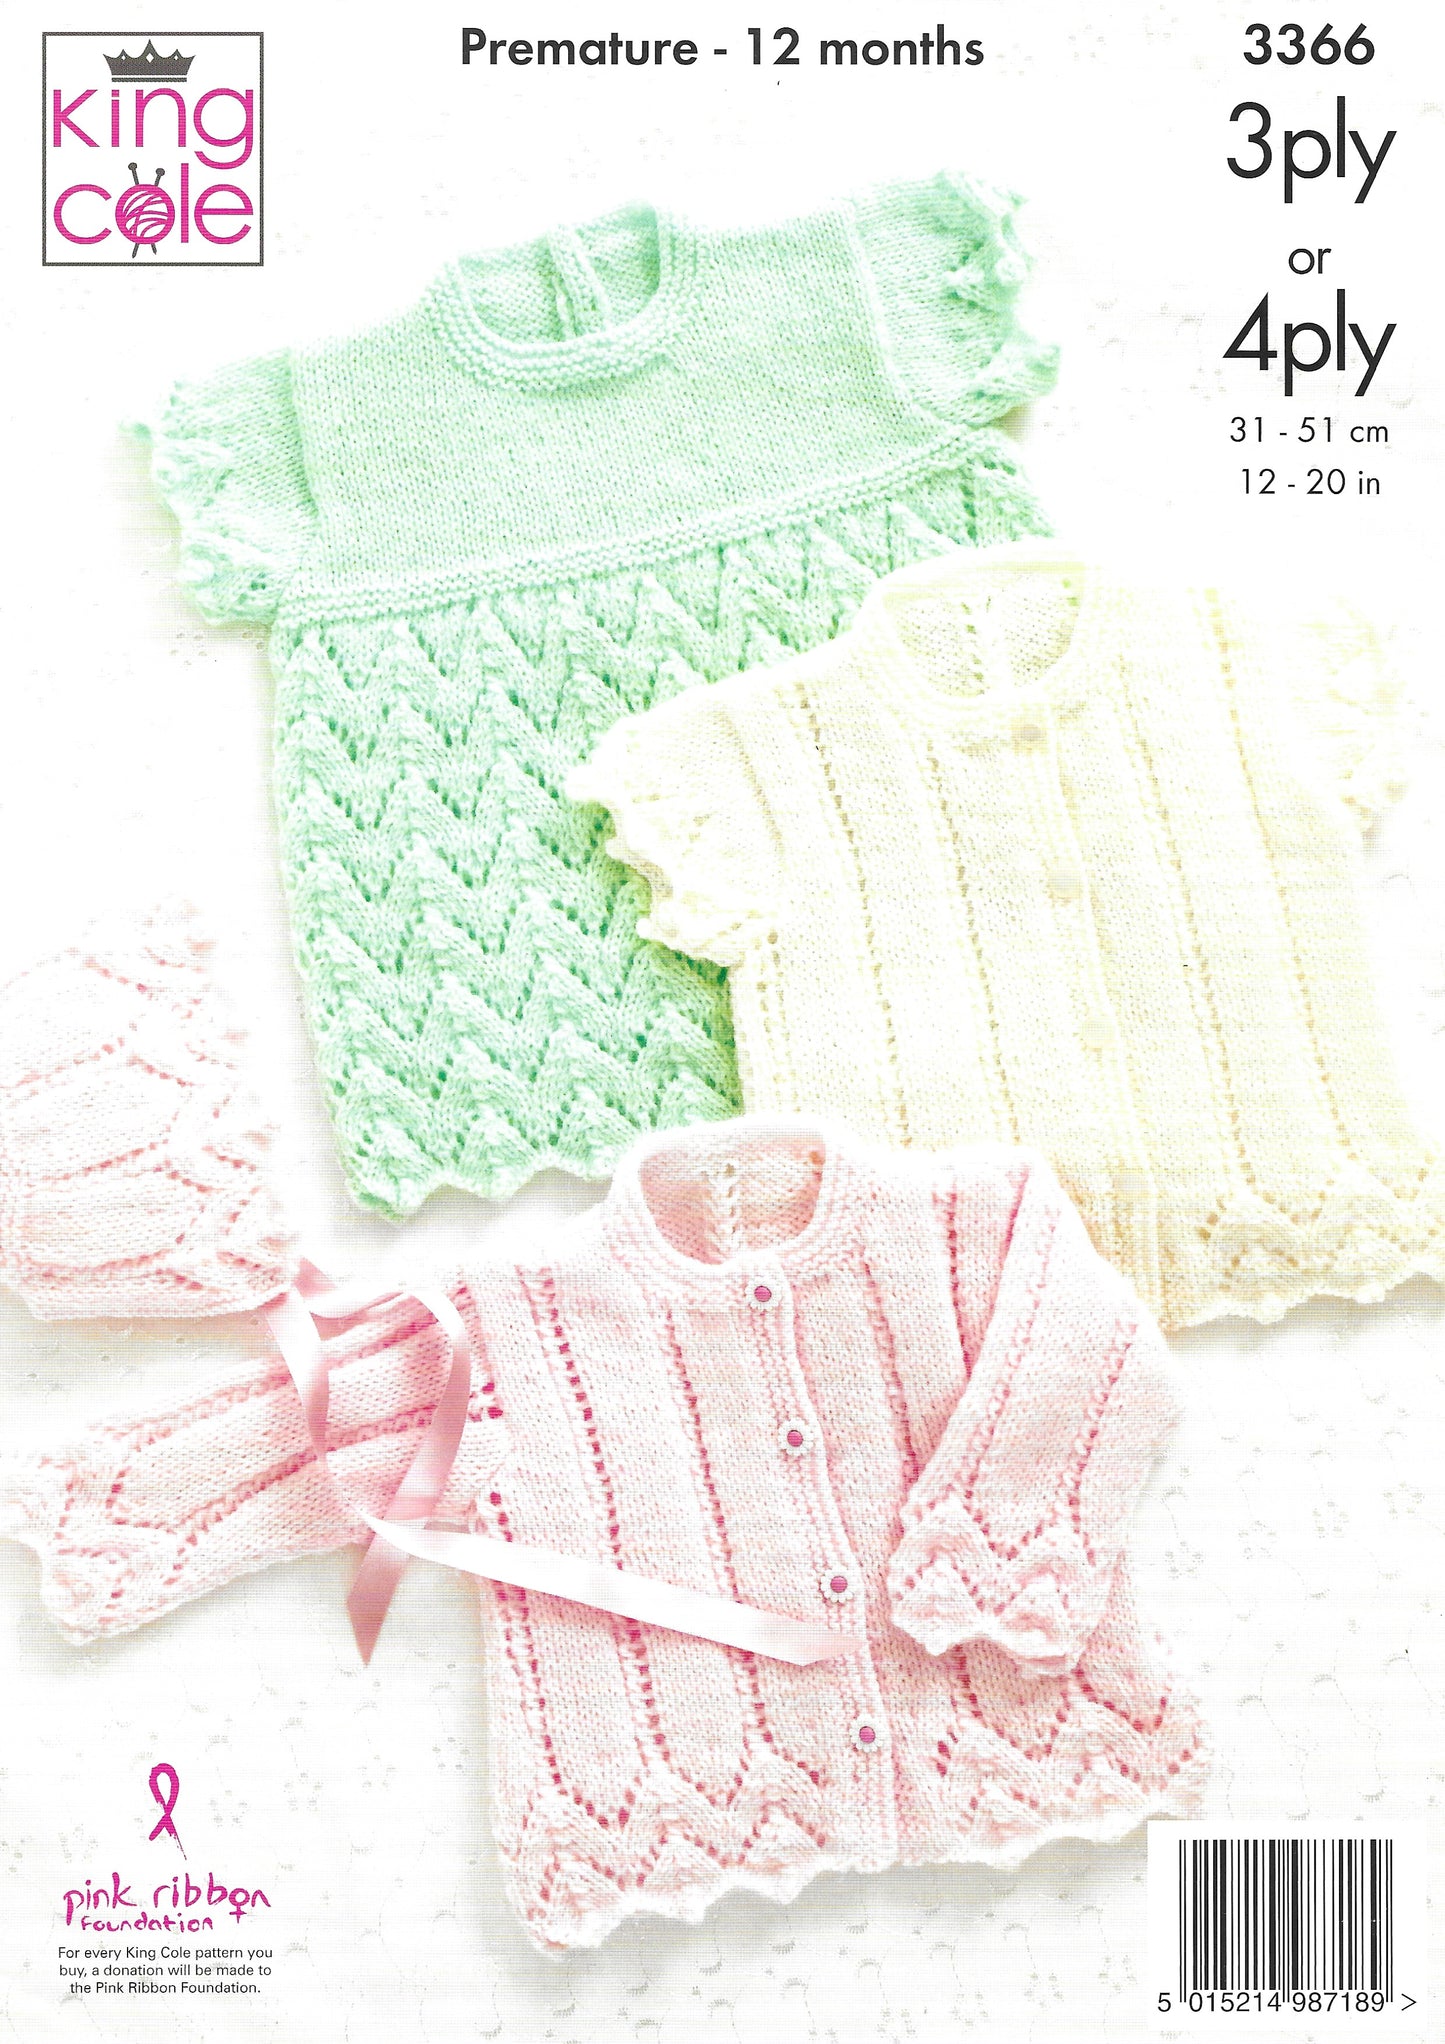 King Cole 3366 Premature -12 months, Cardigans, Bonnet & Angel Top, 3ply & 4ply Knitting Pattern